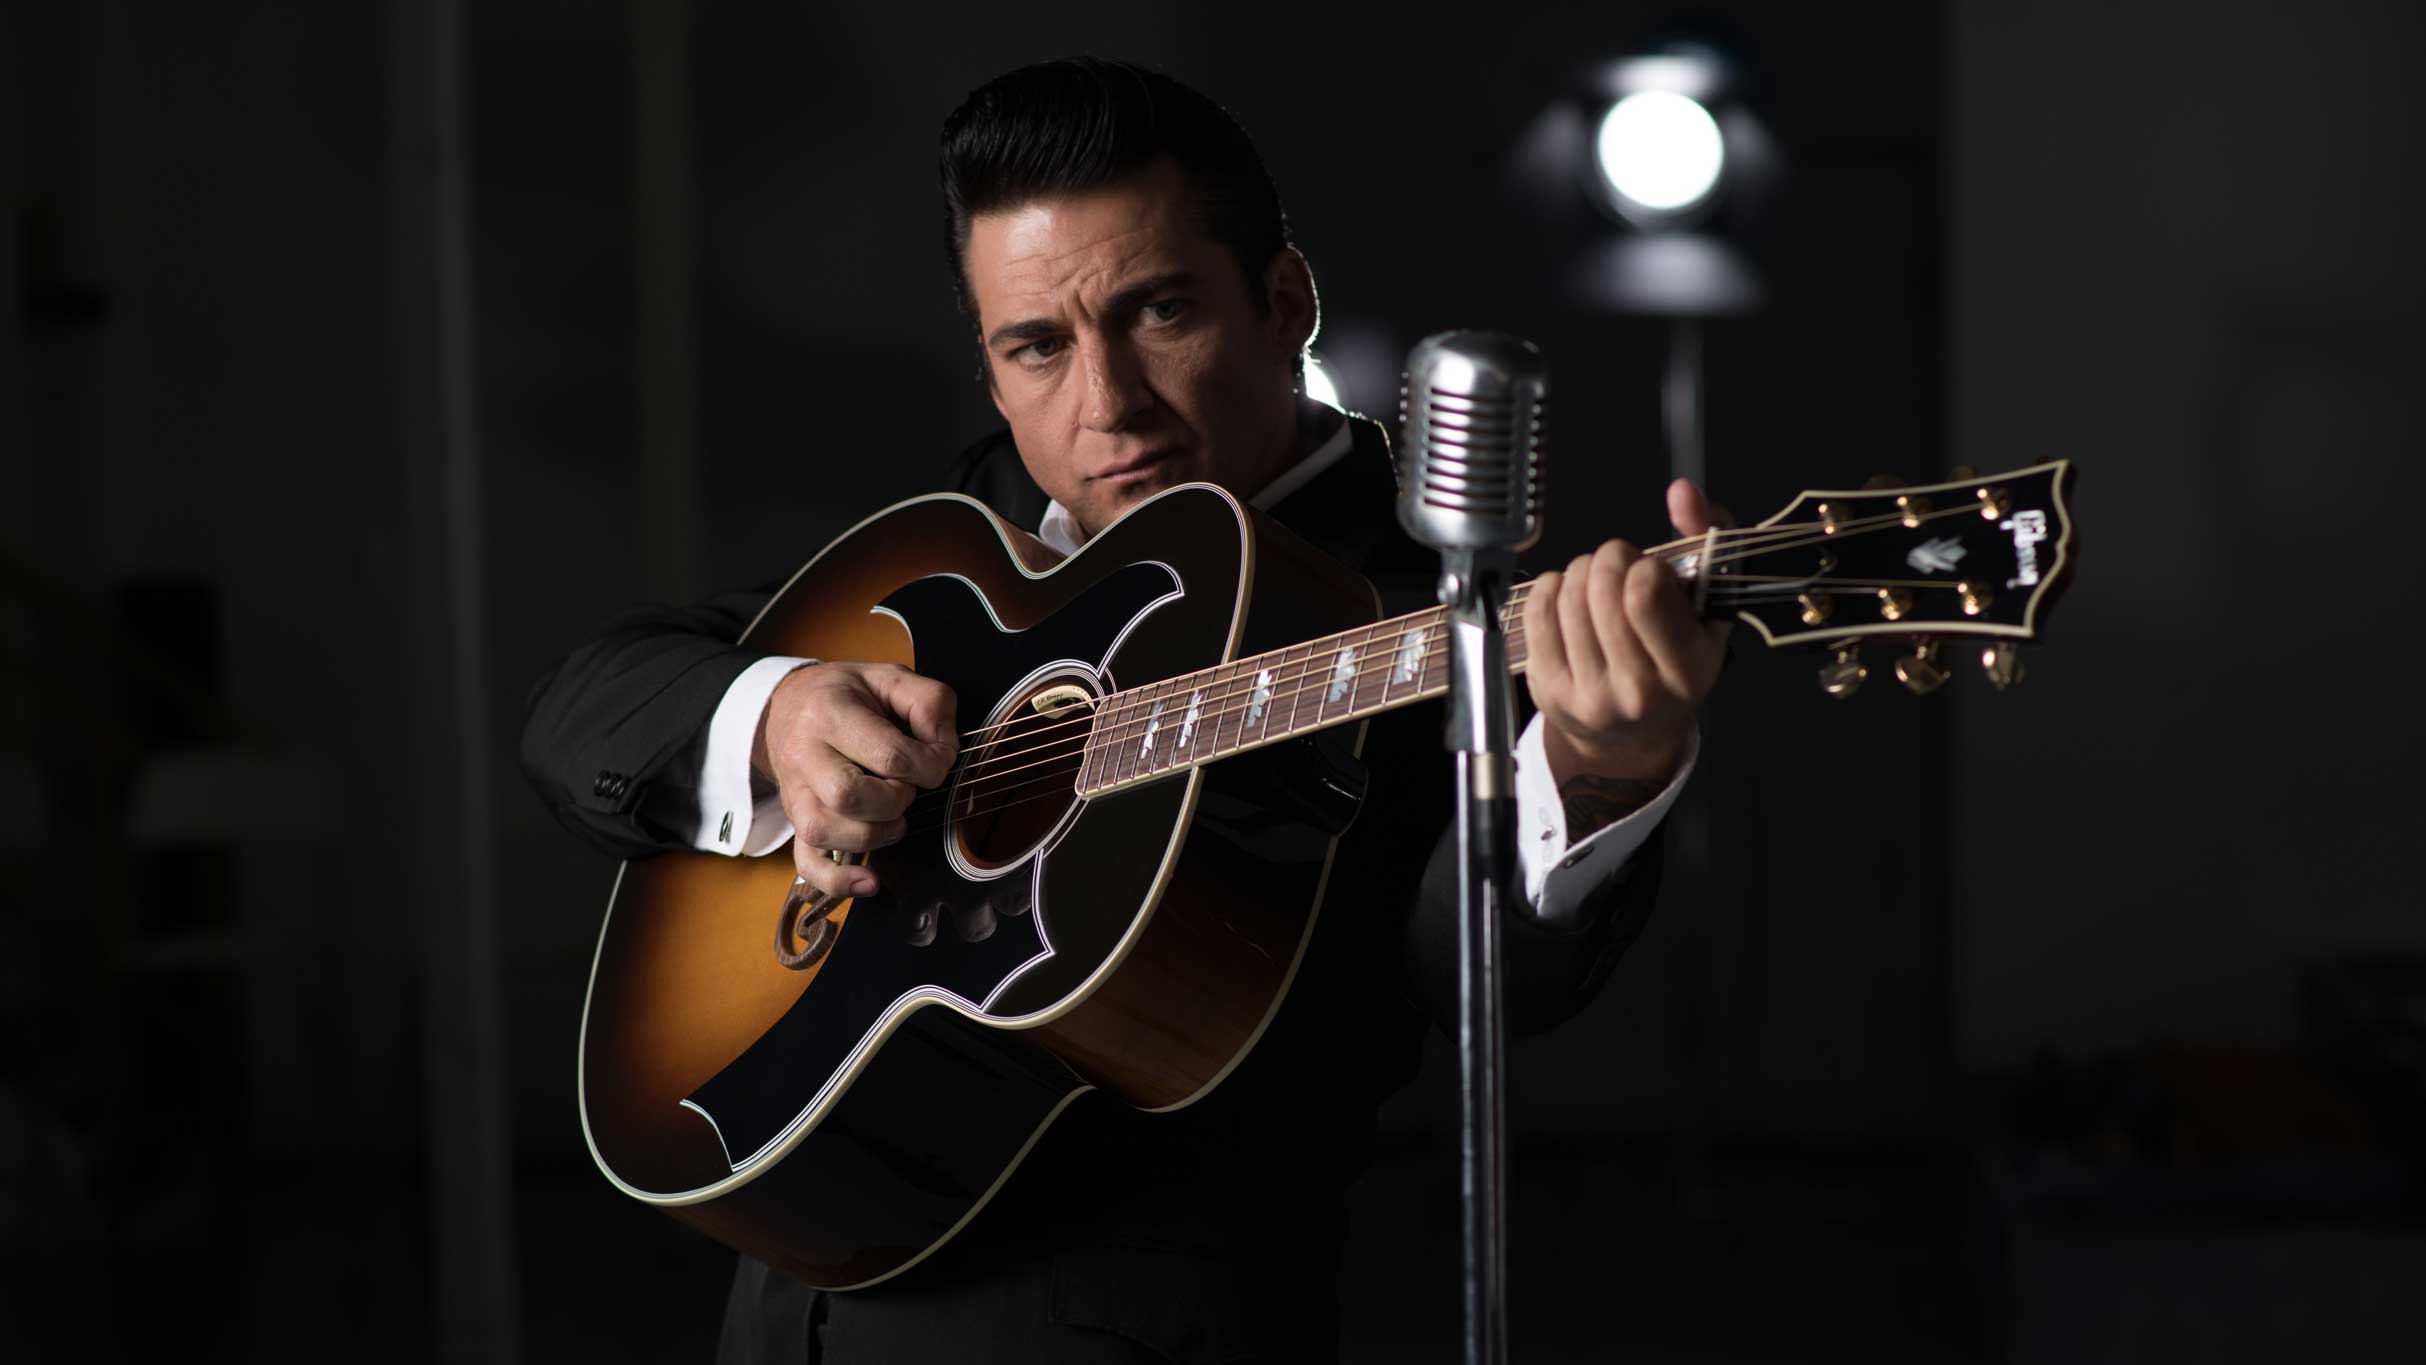 The Man in Black: A Tribute to Johnny Cash